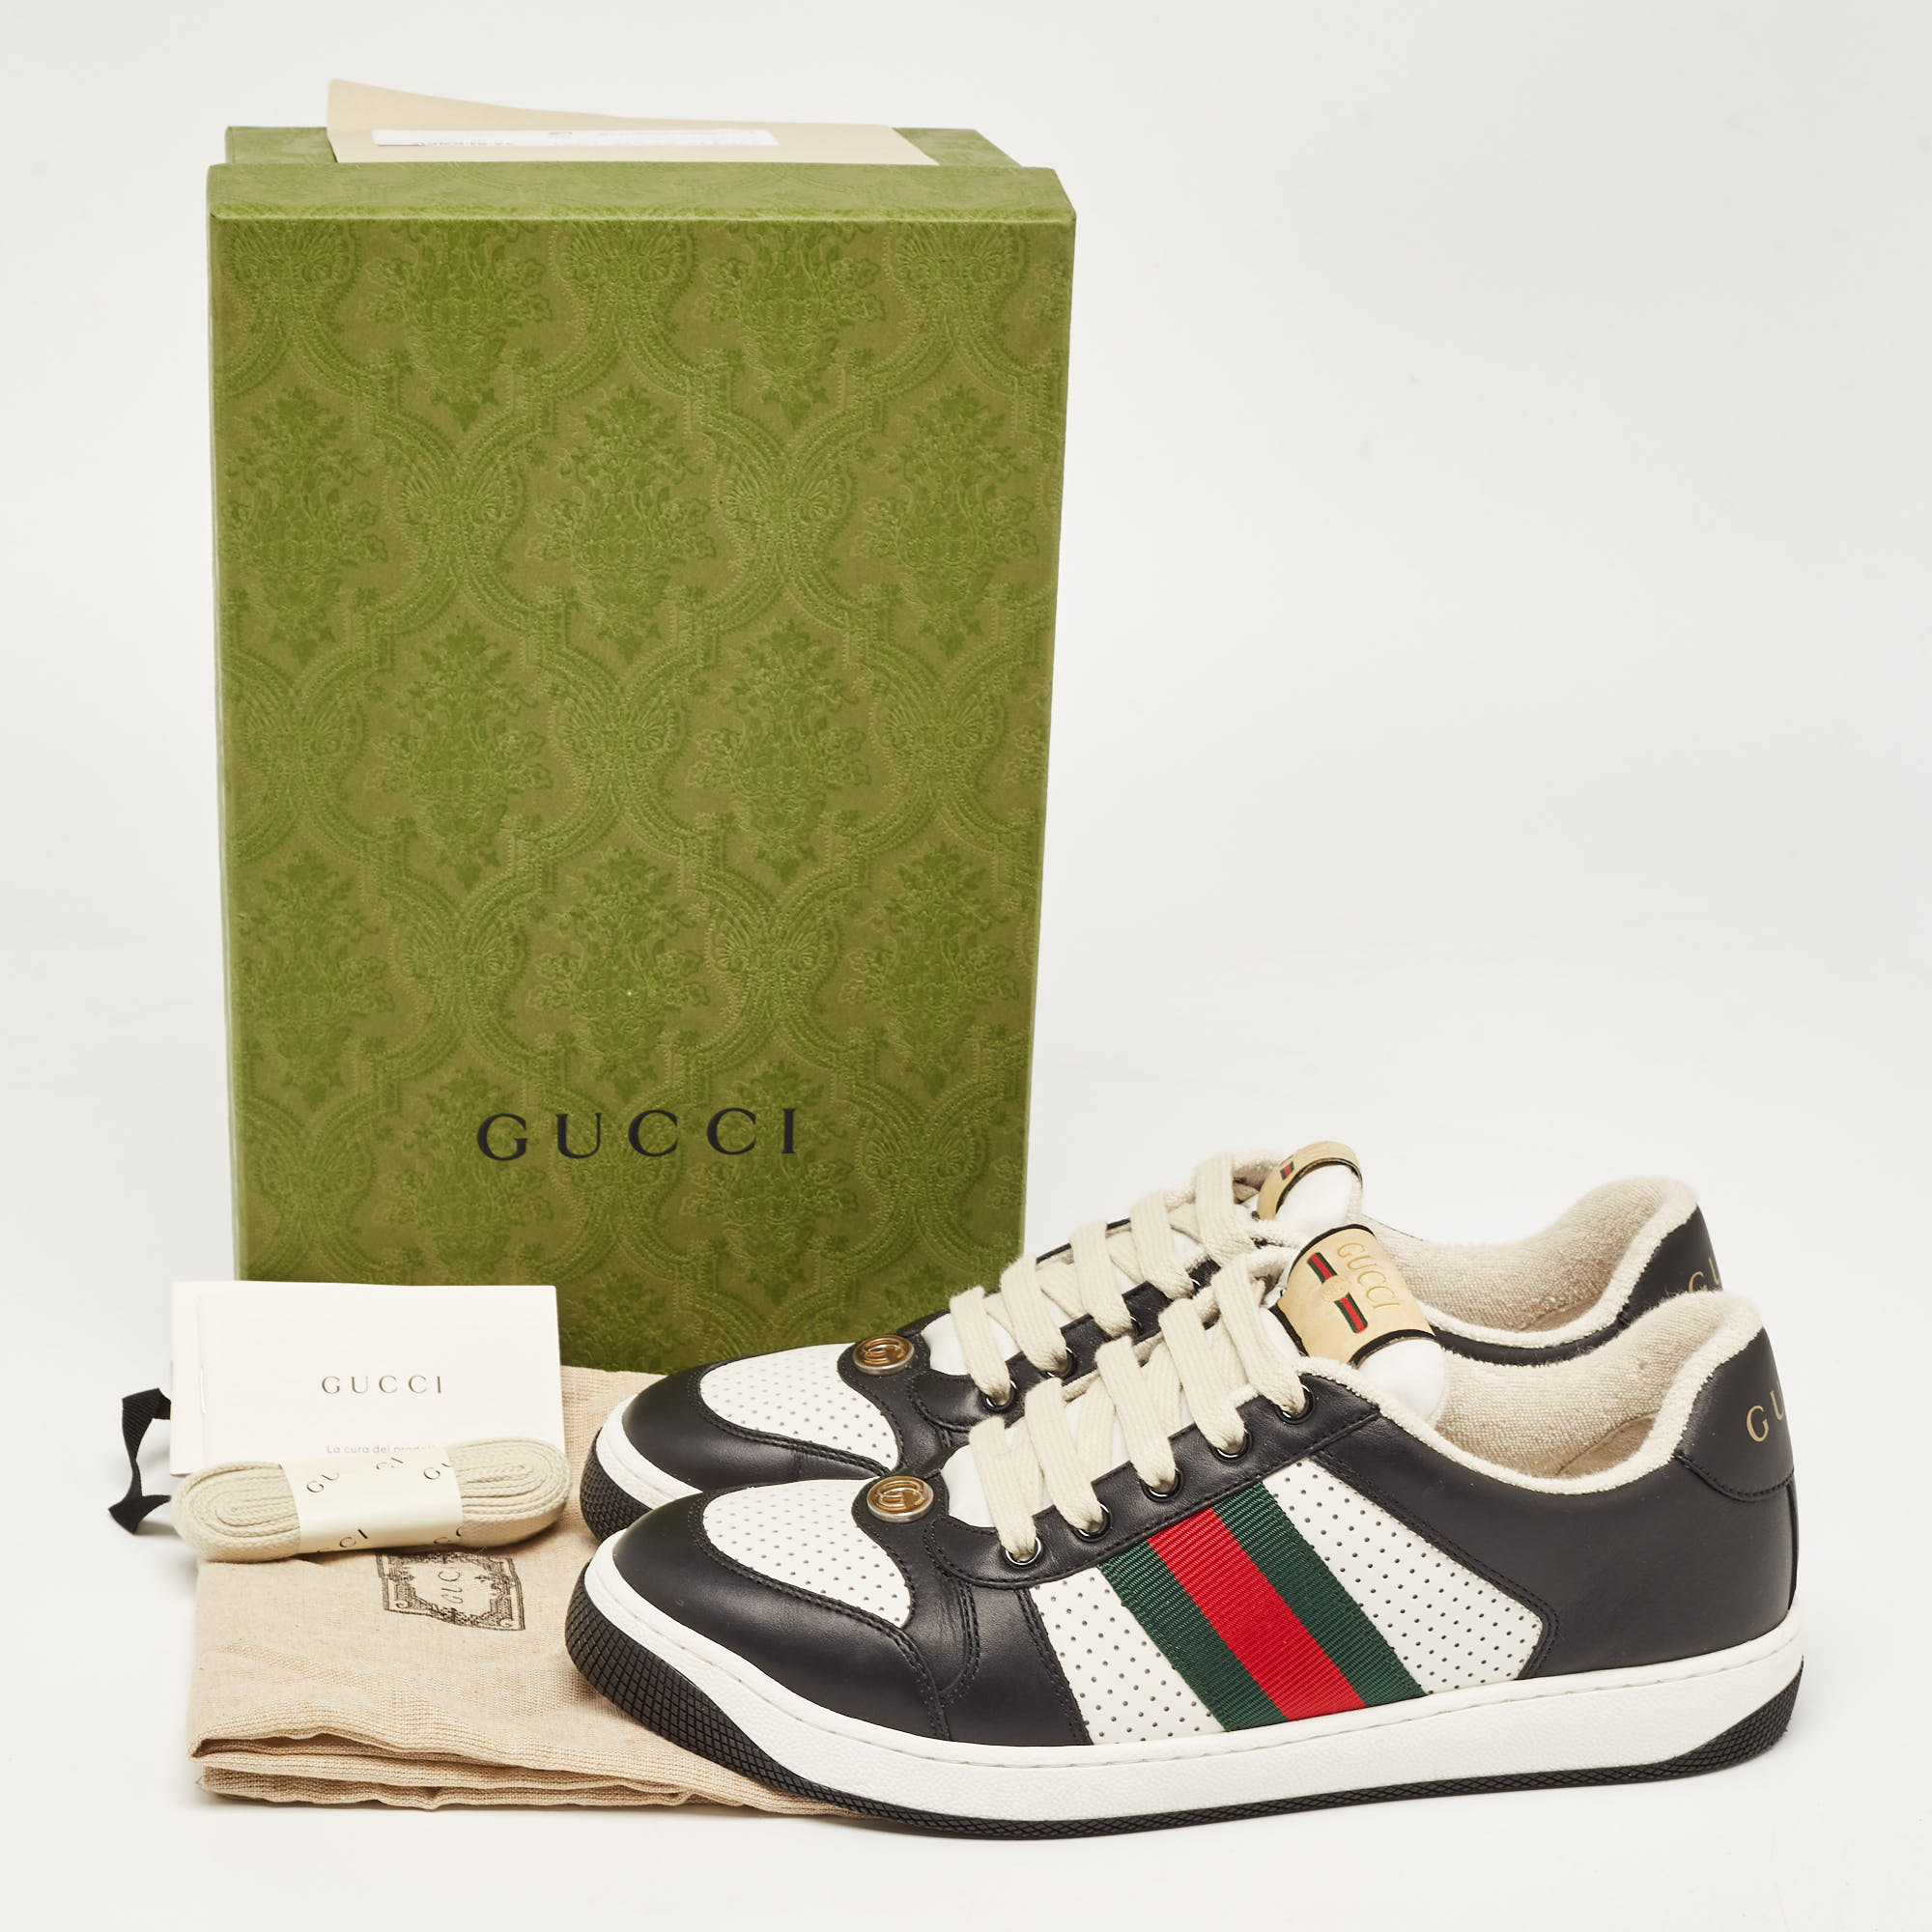 Gucci Black/White Leather Screener Sneakers Size 39